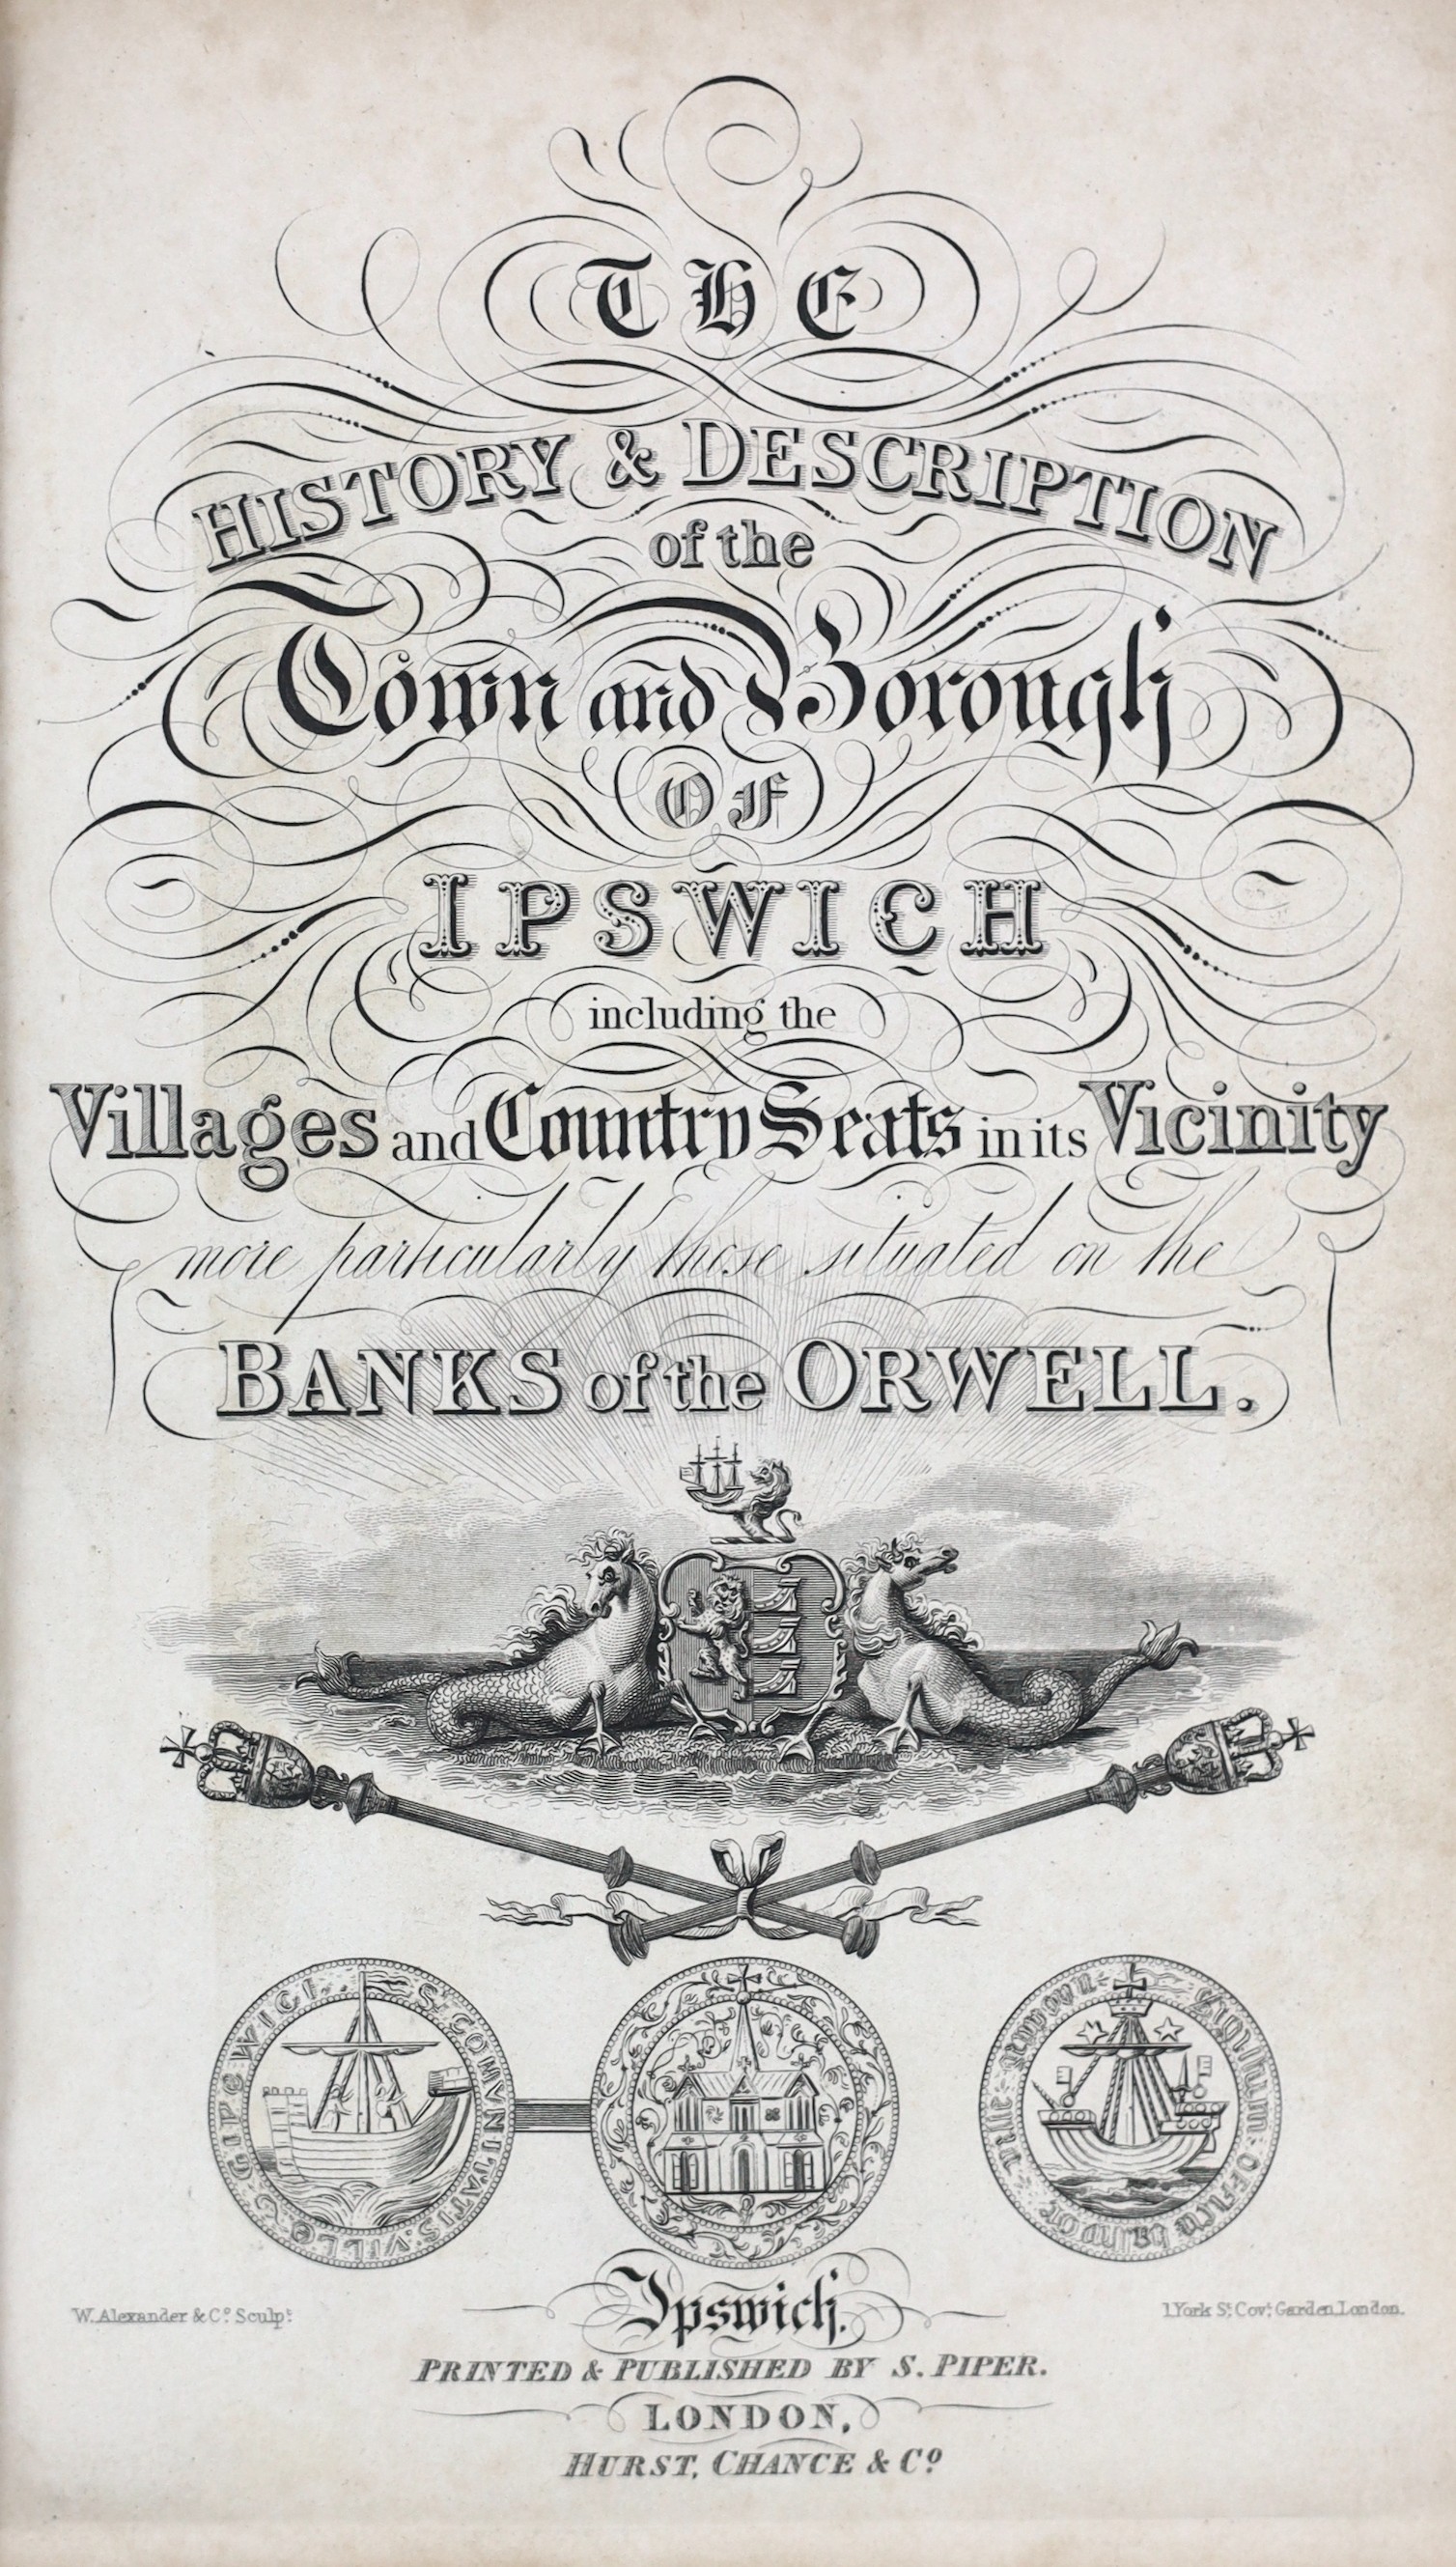 SUFFOLK: (Clarke, G.R.) The History and Description of the Town and Borough of Ipswich including the Villages and Country Seats in its Vicinity ... engraved pictorial title